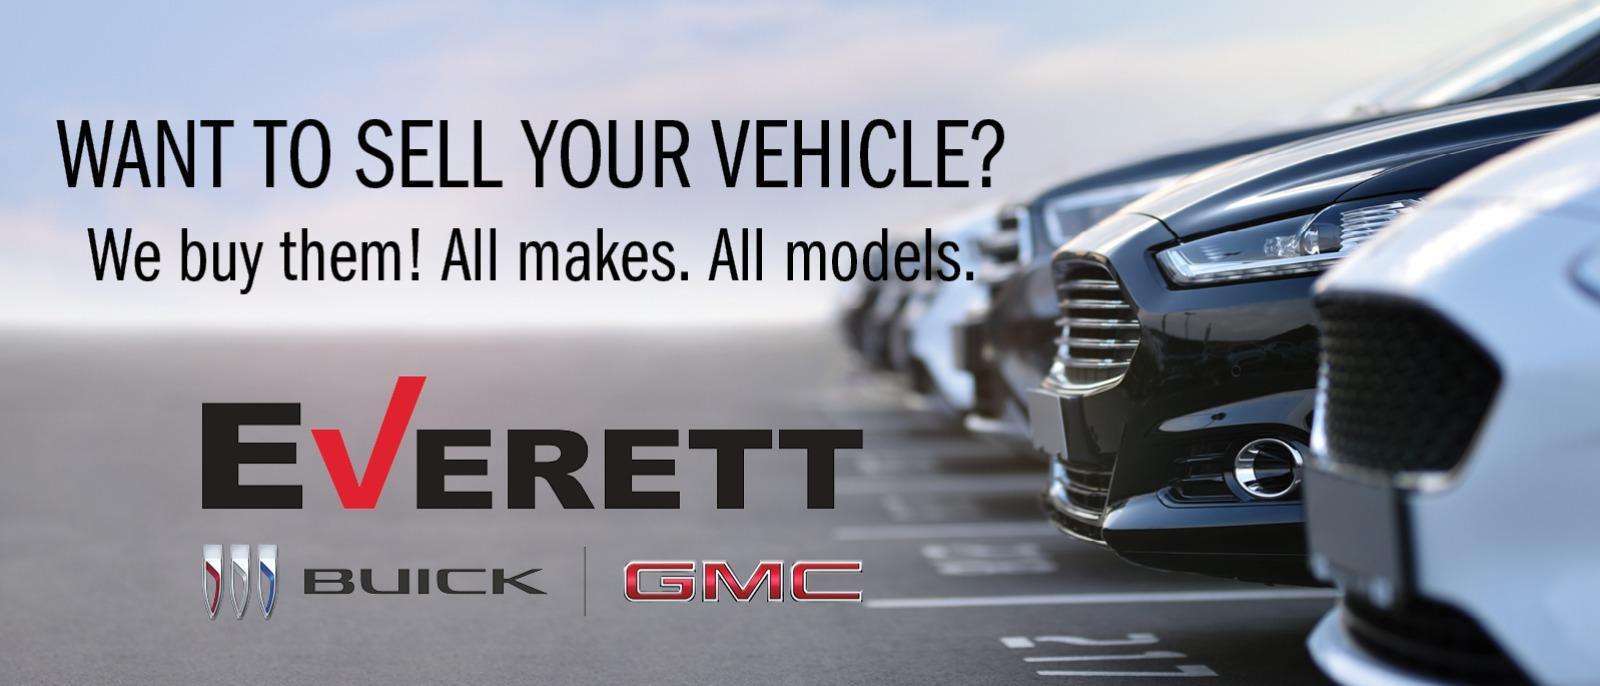 Sell your Car at Everett Buick GMC Near Conway